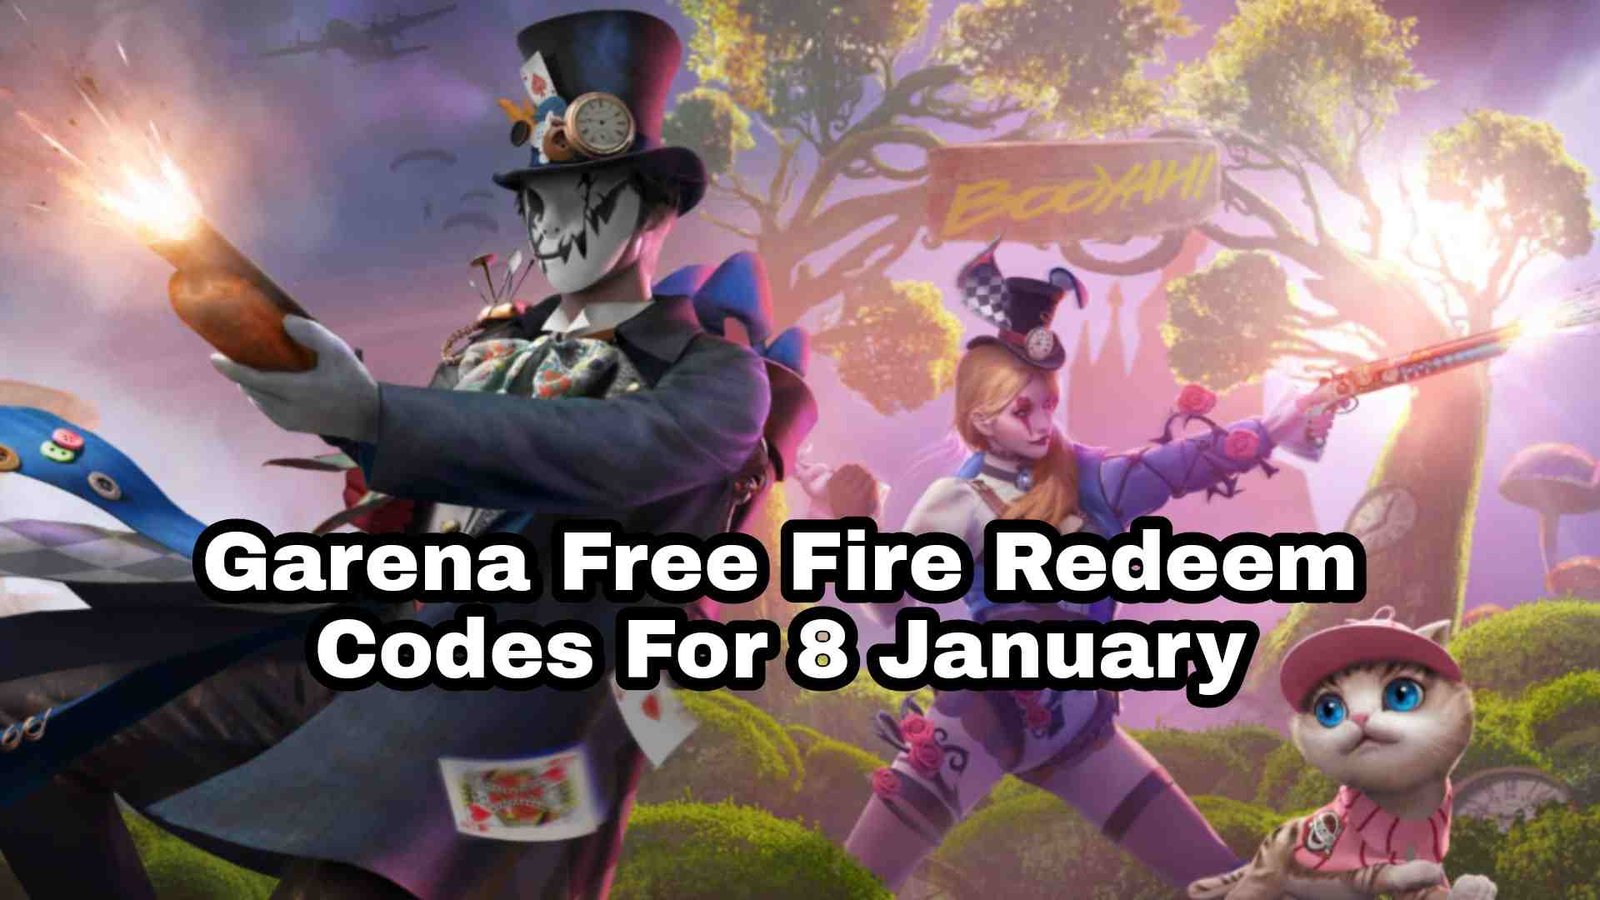 Garena Free Fire Redeem Codes For 8 January 2022: Free Reward offer; Know How to grab it online